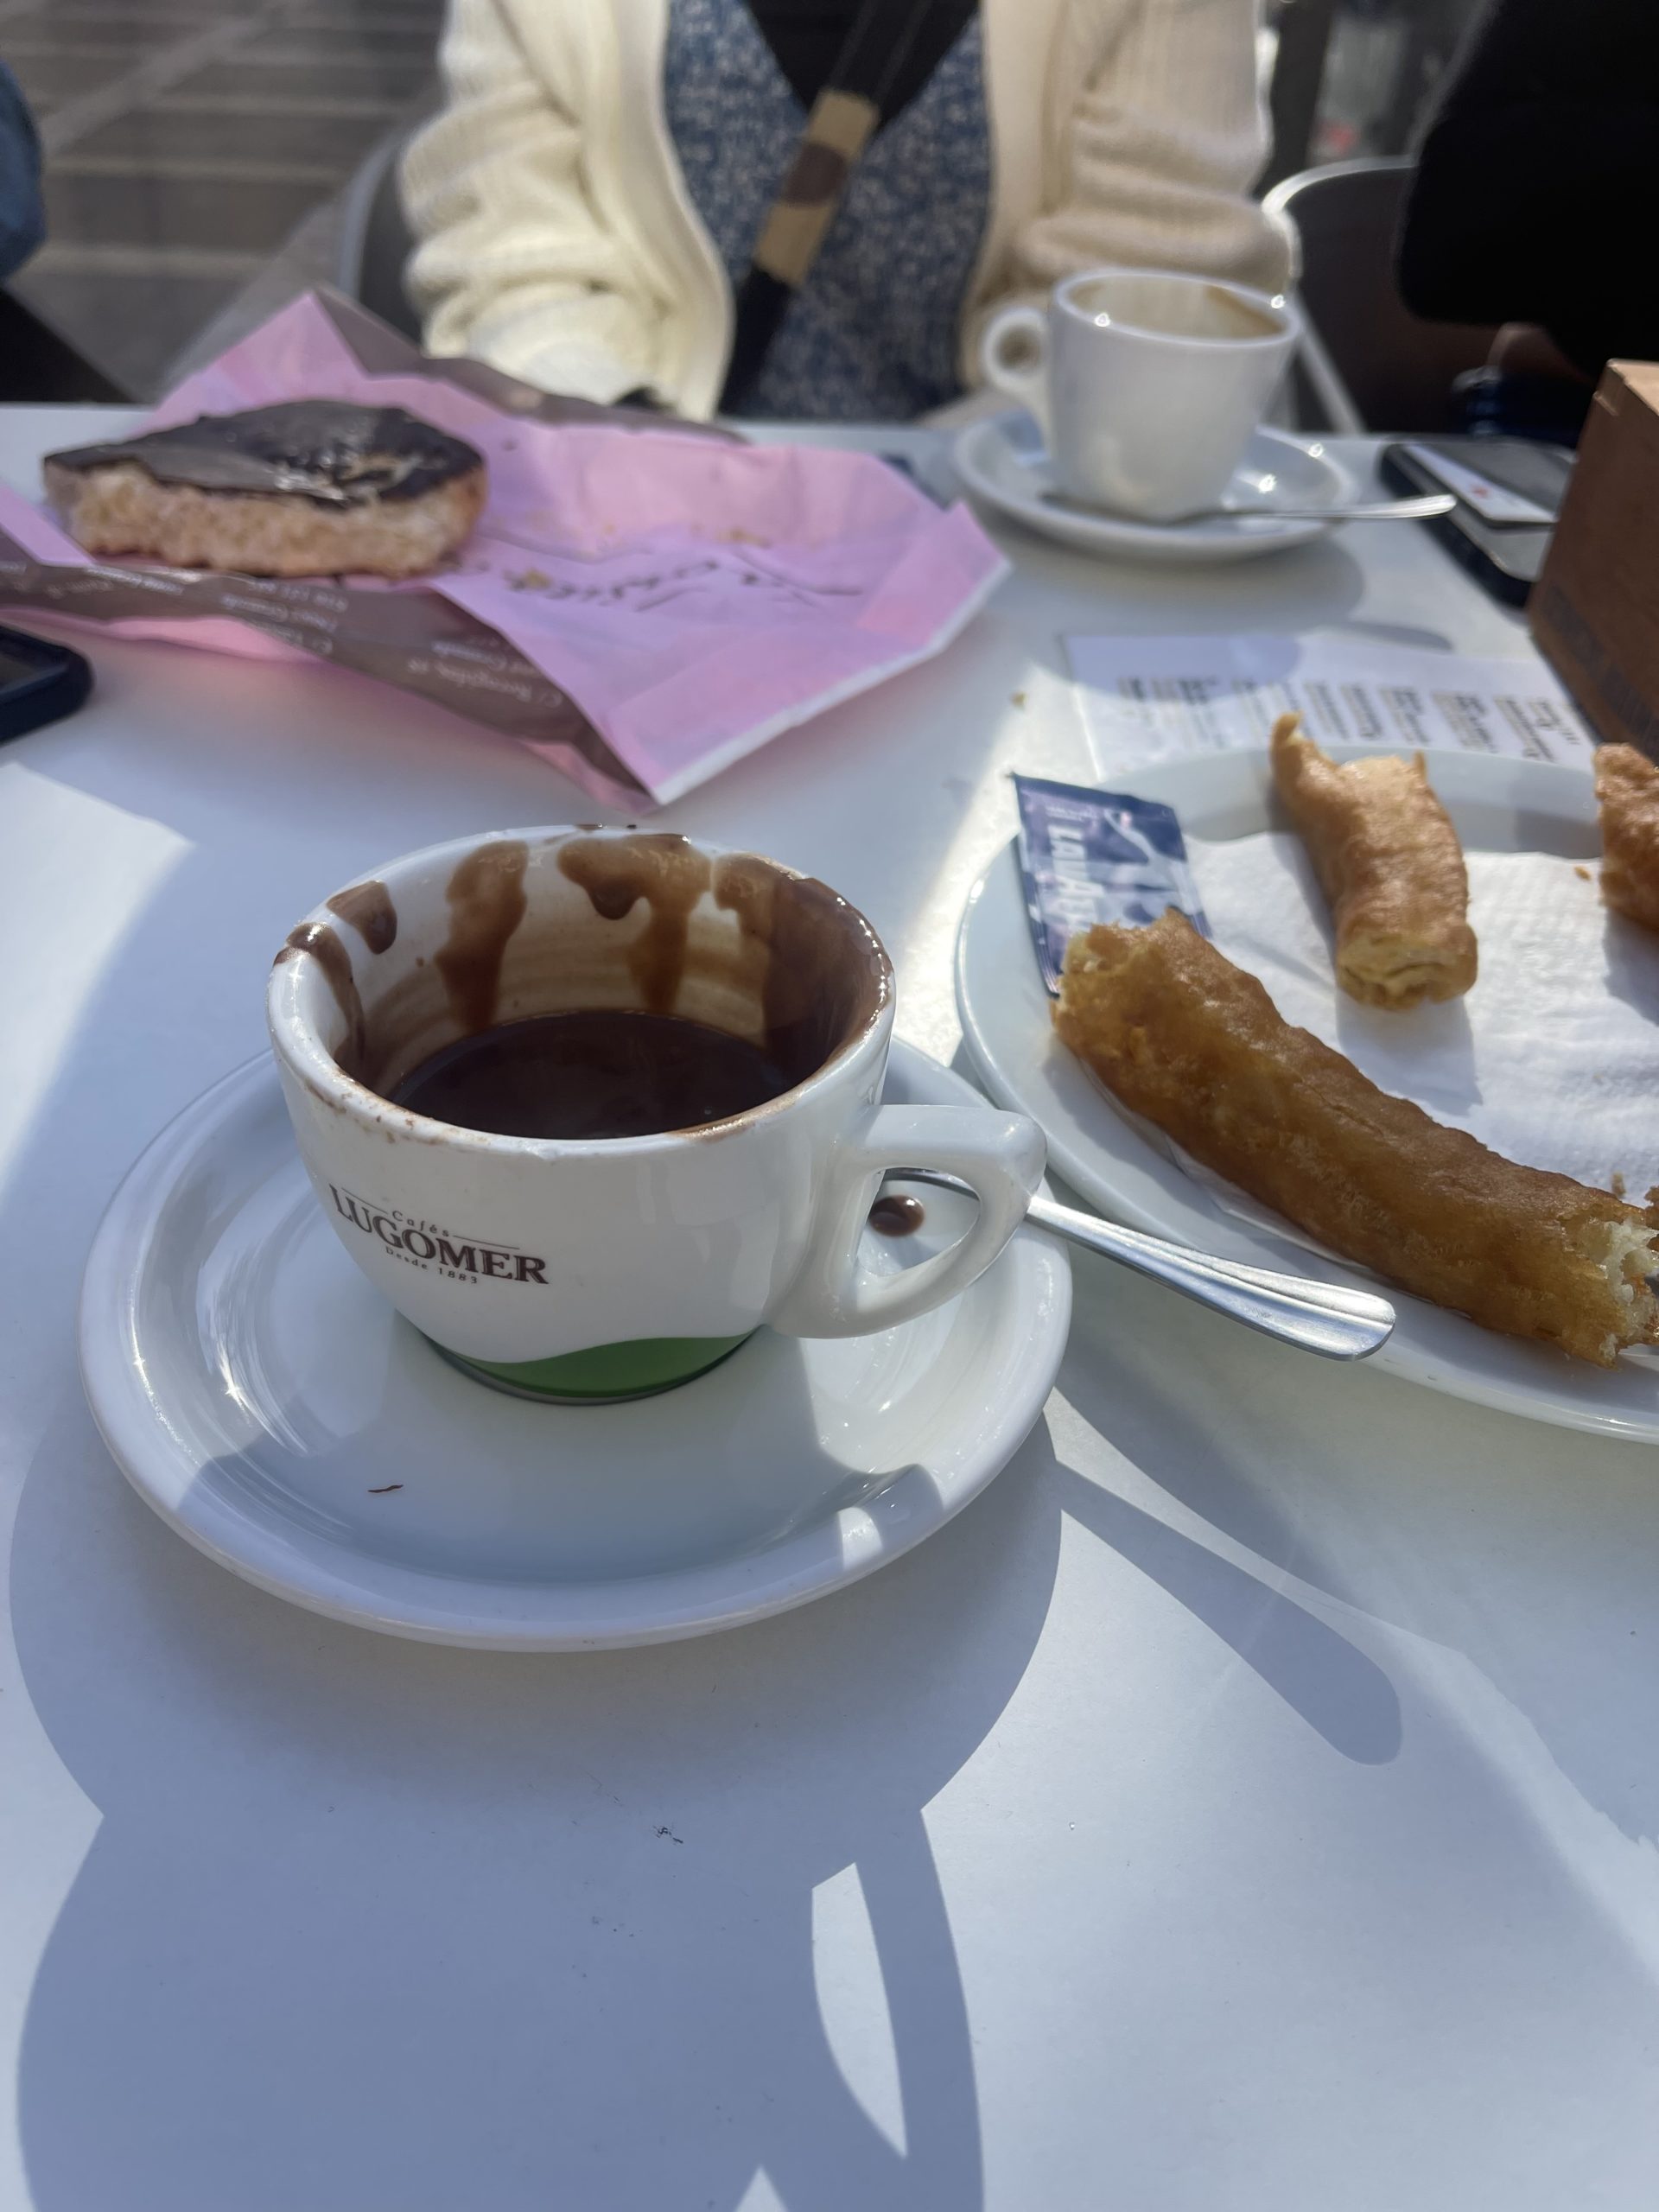 A picture of a mug of hot chocolate and a plate of churros on a table.